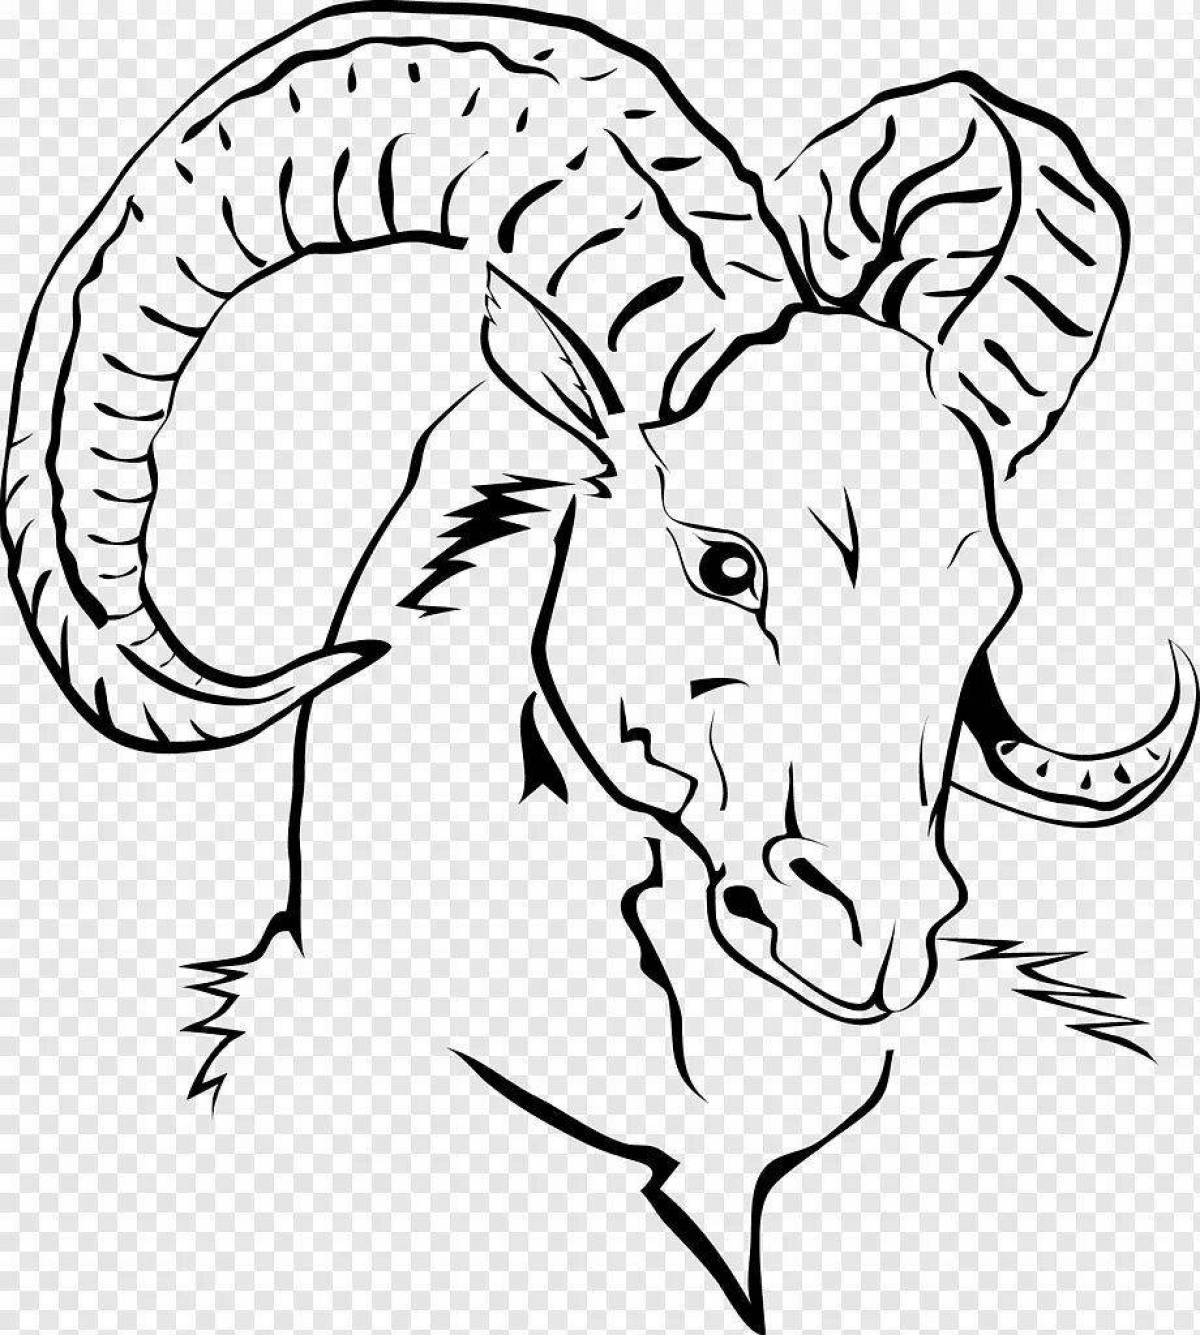 Coloring page playful ram